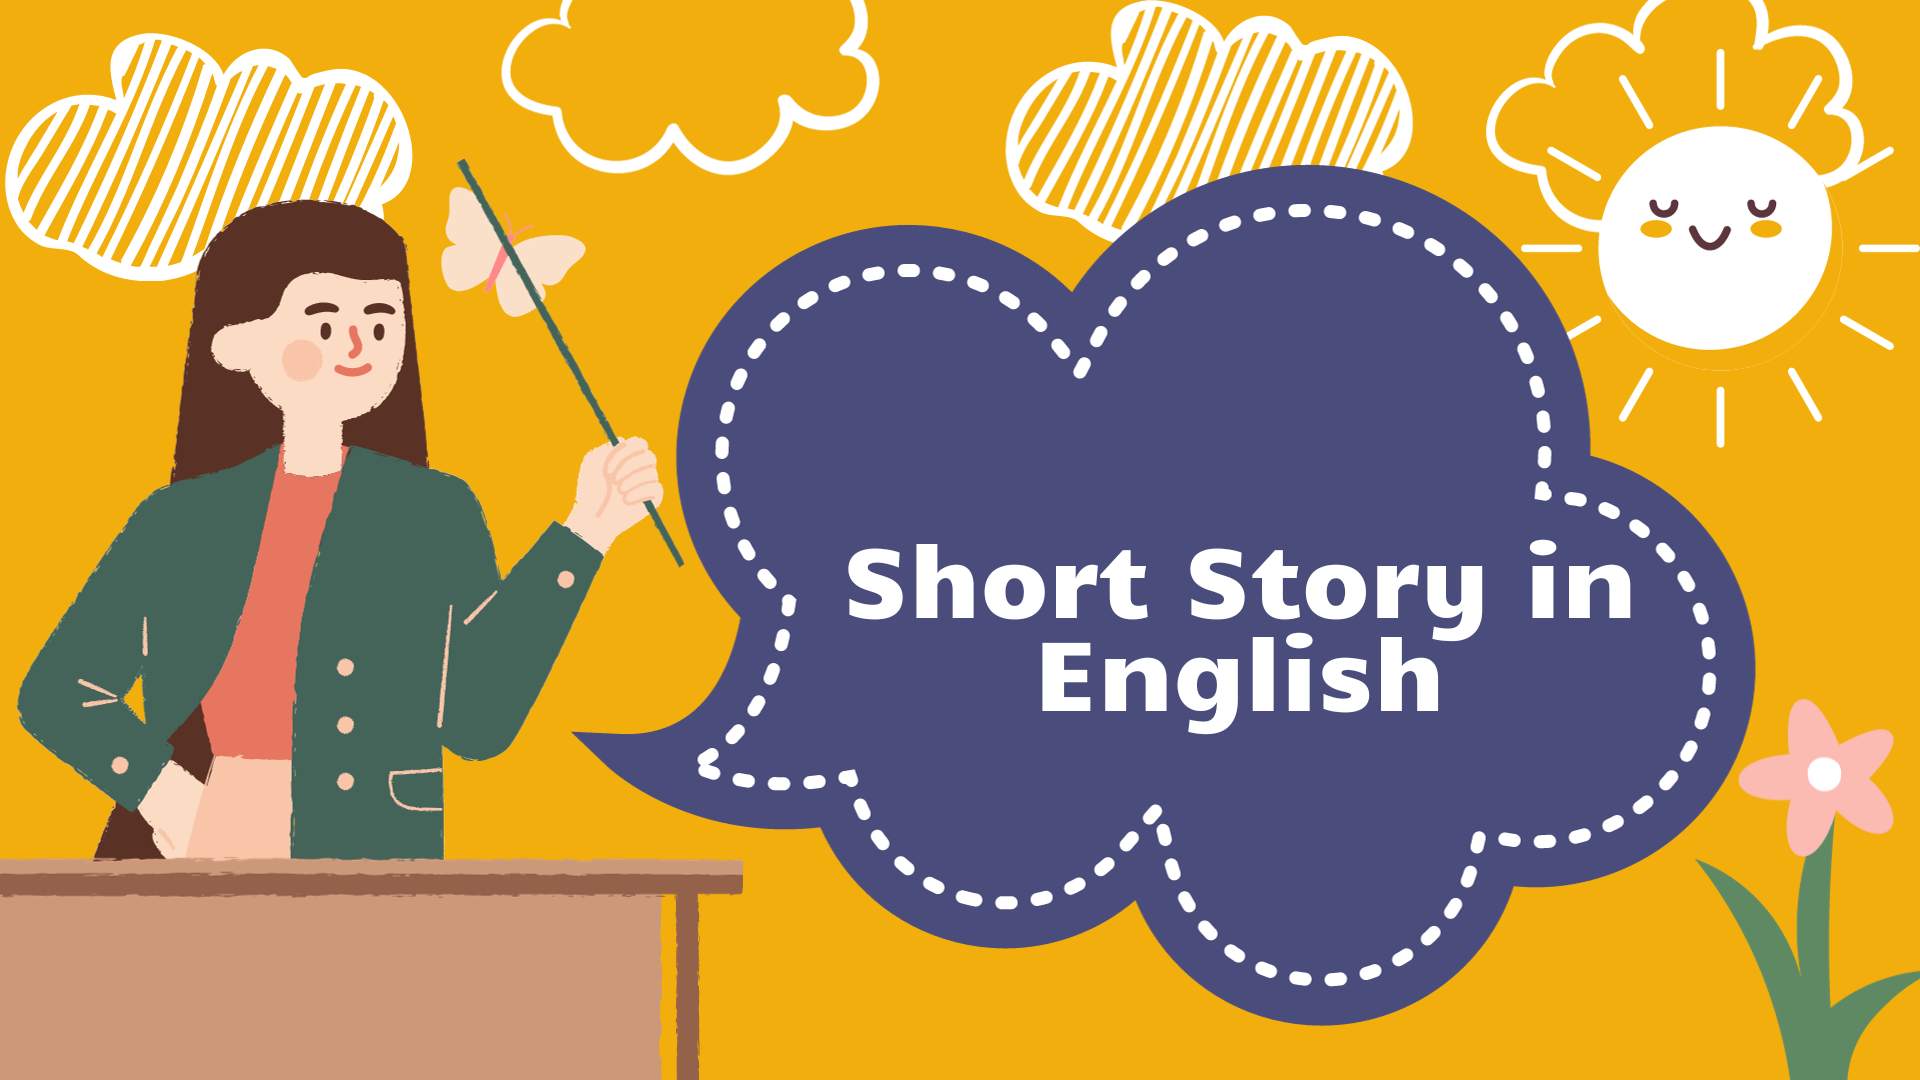 Short Story in English